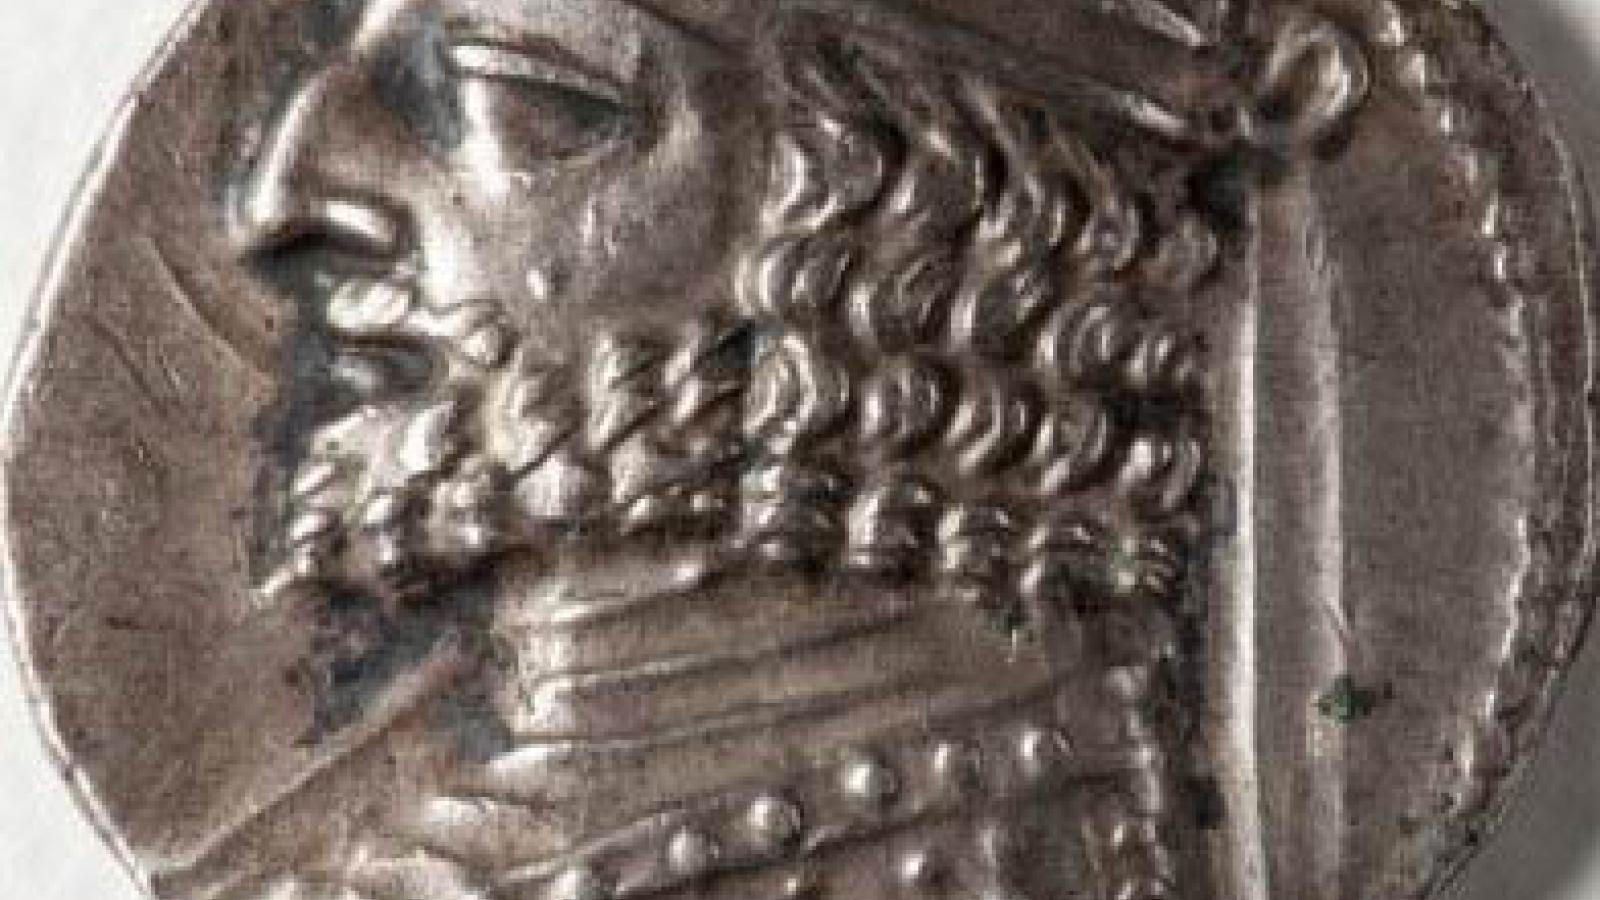 Image of ancient Iranian coin depicting head of a man. 